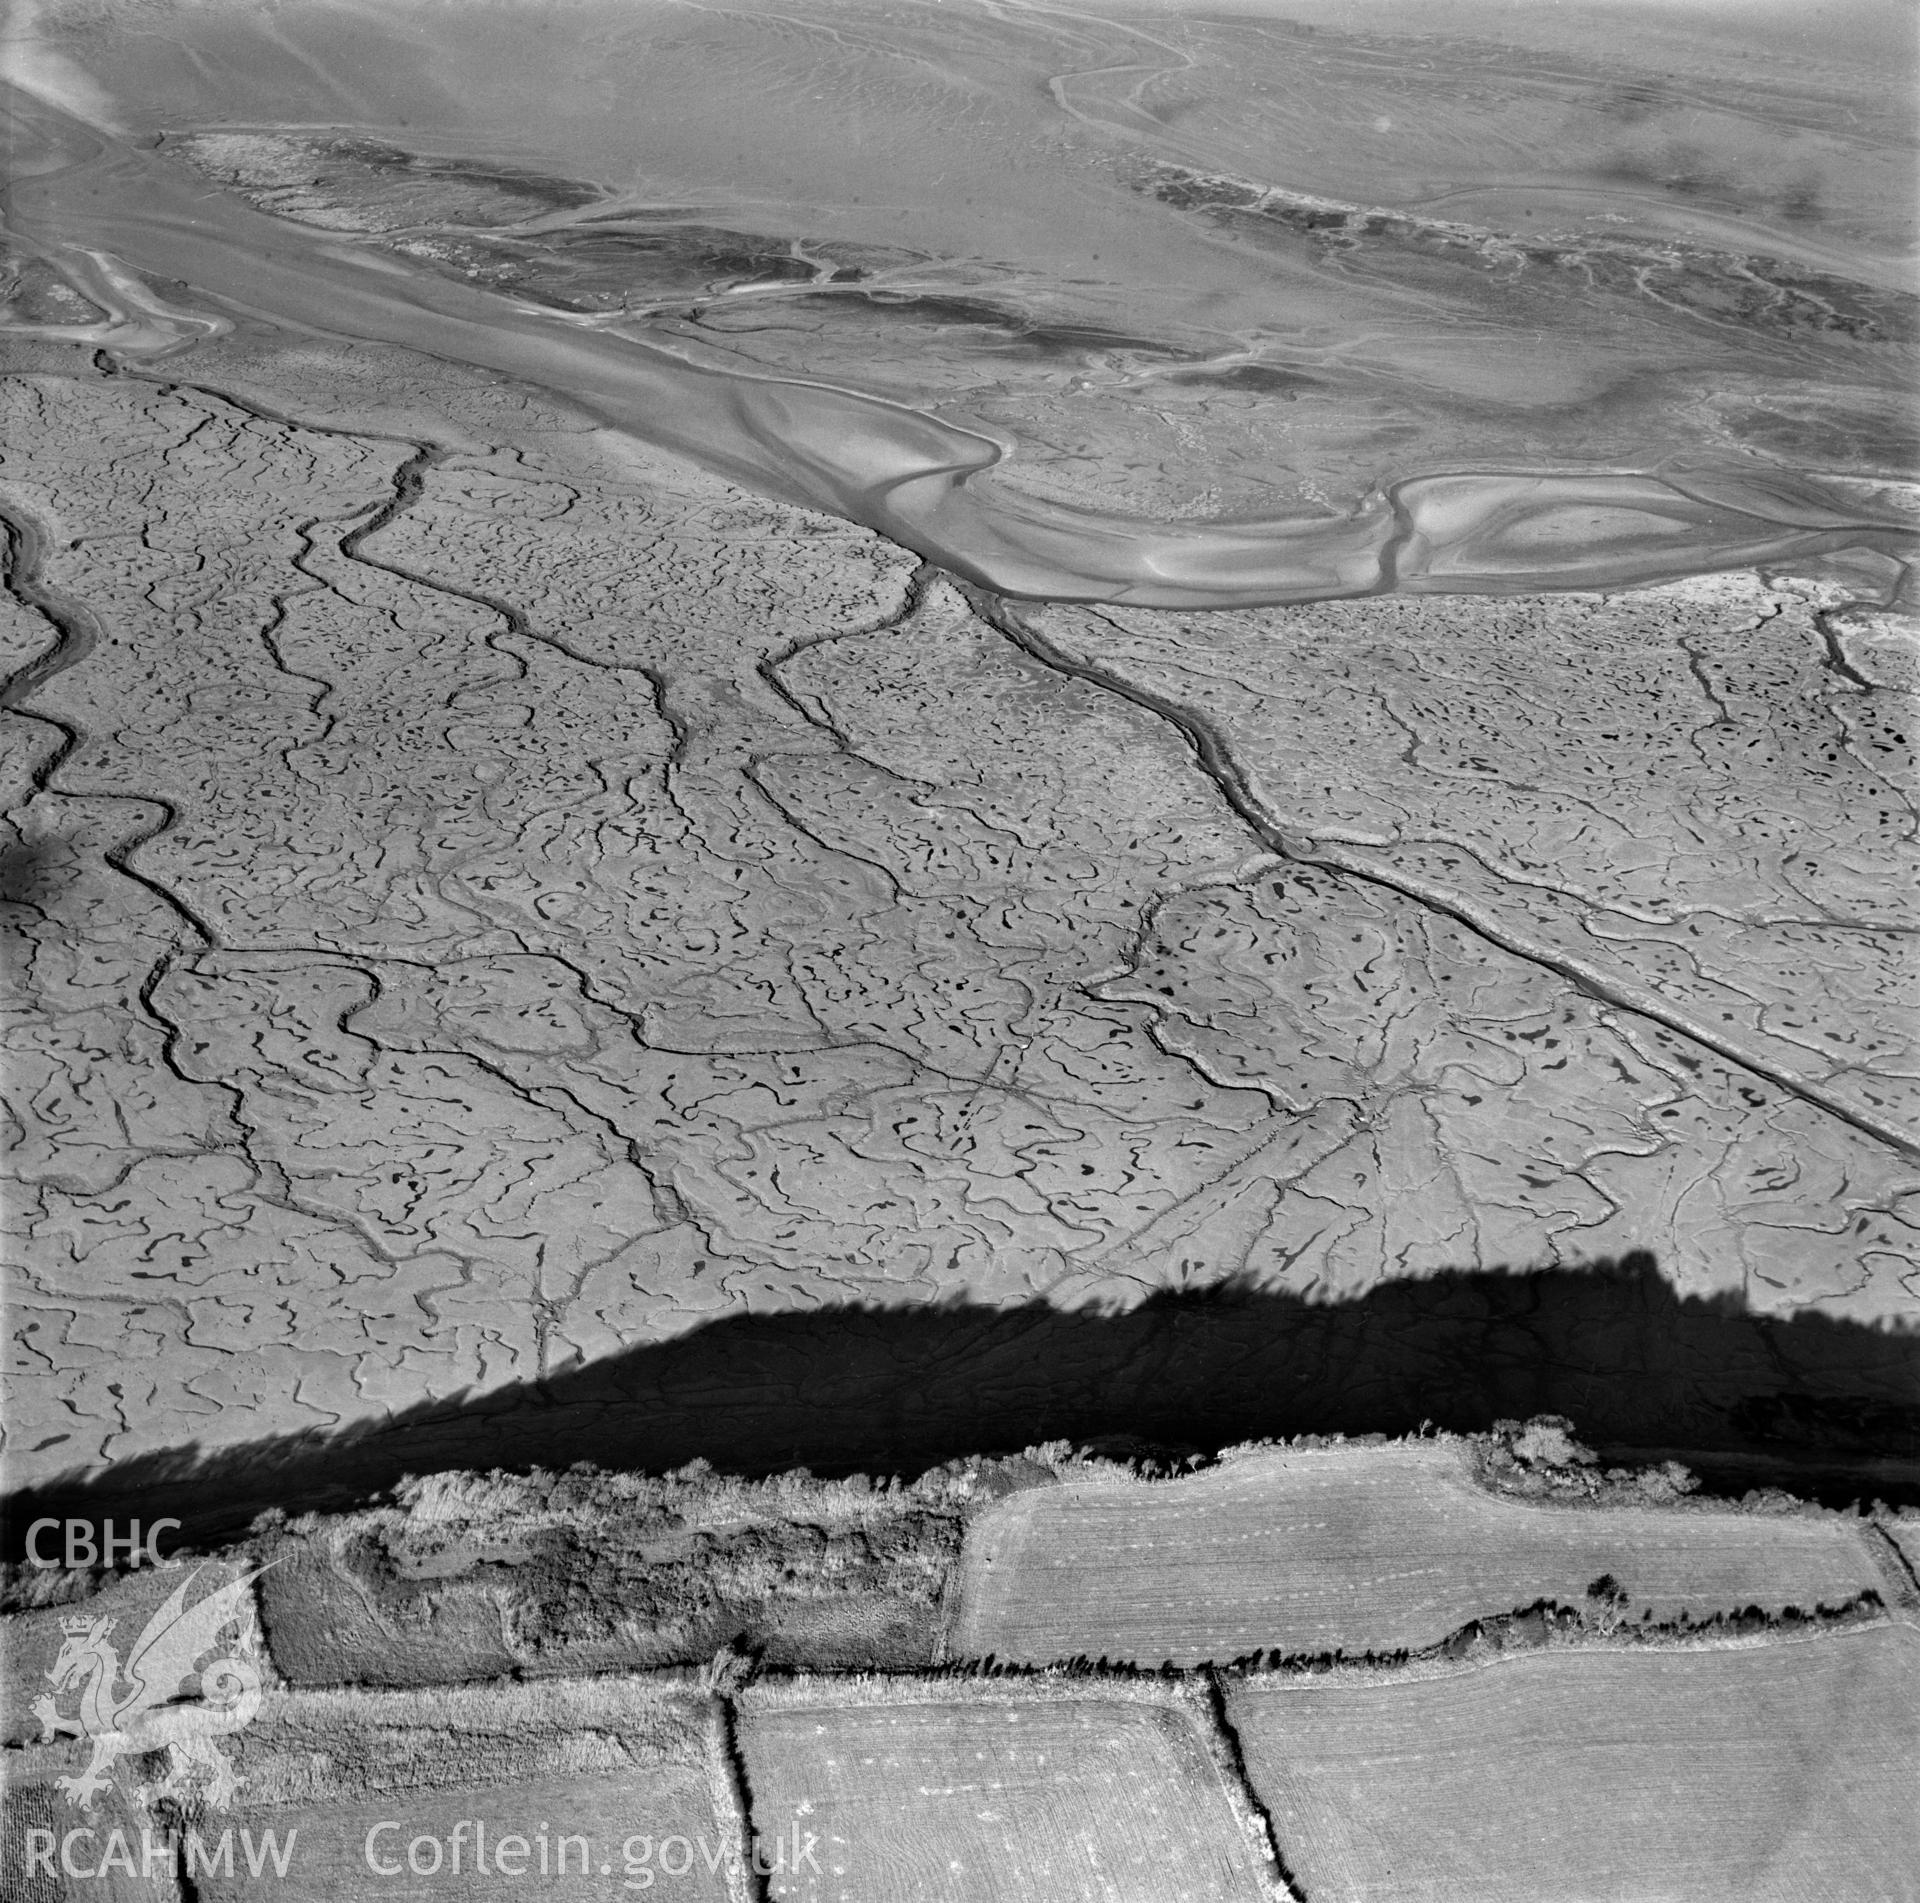 View of mud patterns in the Loughor estuary near Llanelli